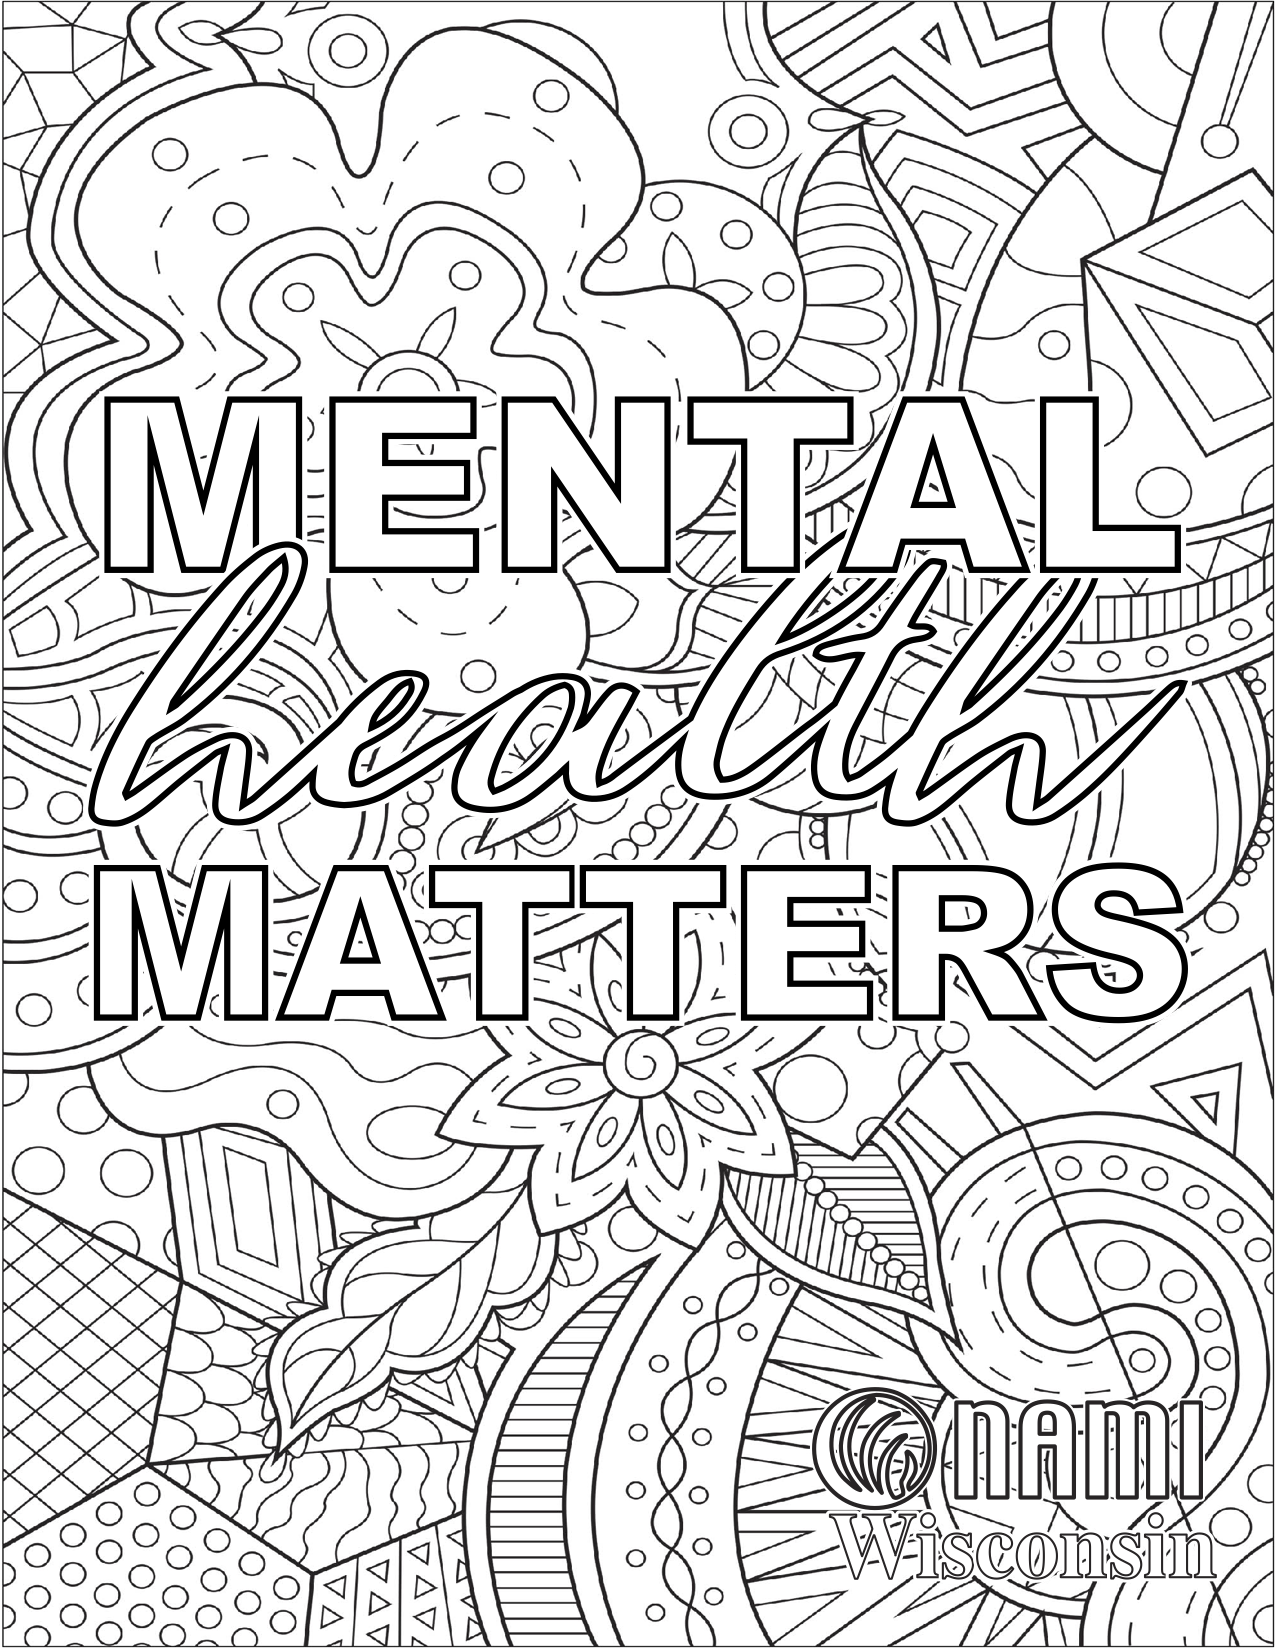 Printable Mental Health Coloring Pages Get Your Hands On Amazing Free Printables 